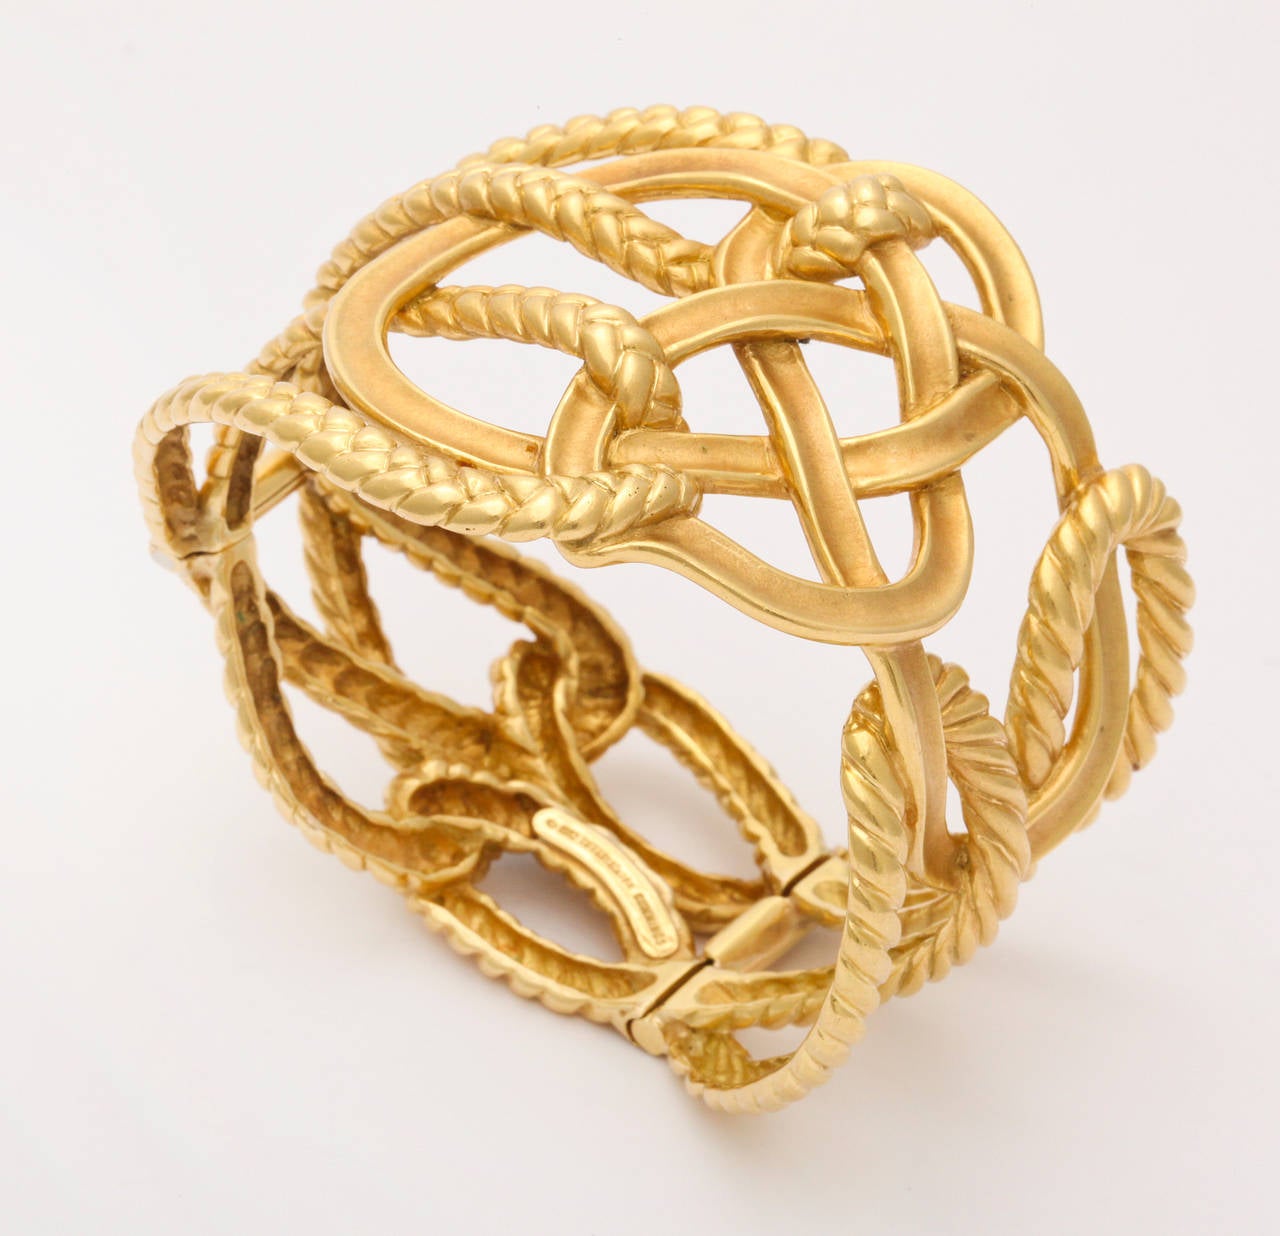 Unusual Angela Cummings bracelet design for Tiffany & Co. in 18K gold, cleverly made in solid form, with the look of loosely woven loops of alternating braided and smooth finished gold. 2 inches at the widest point, and fits a 7 inch wrist. Dated